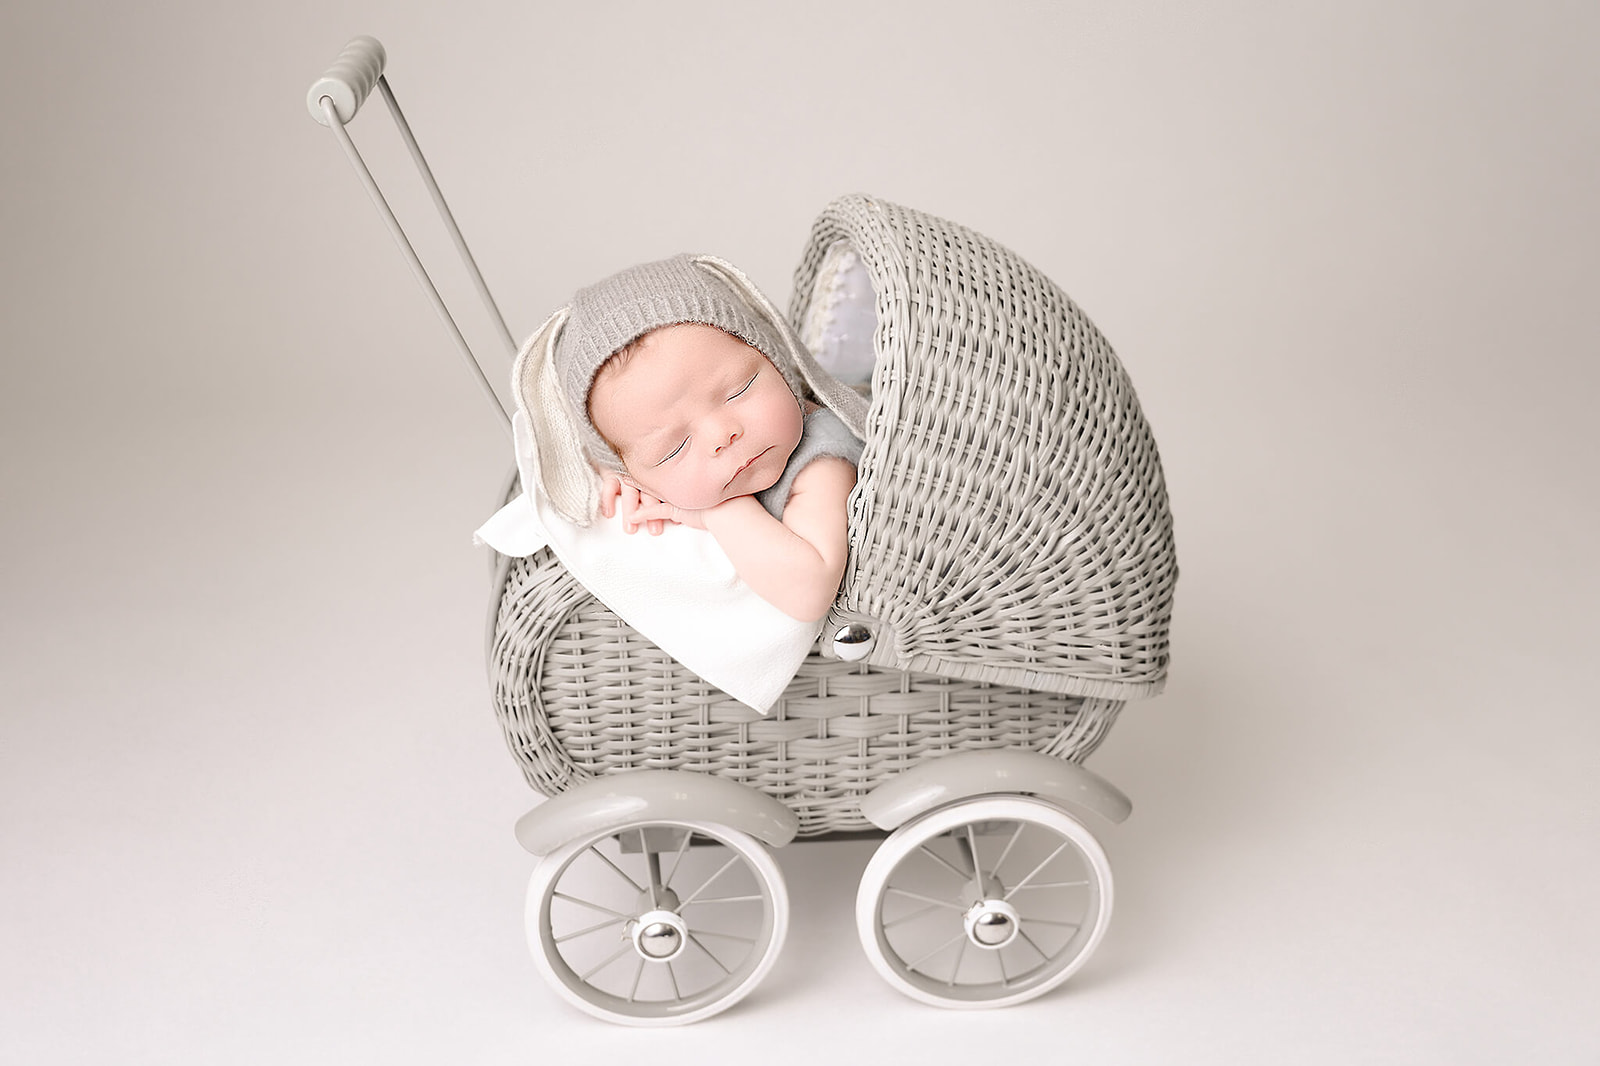 A newborn baby sleeps in a tiny wicker baby carriage in a grey onesie and hat Los Angeles Doulas